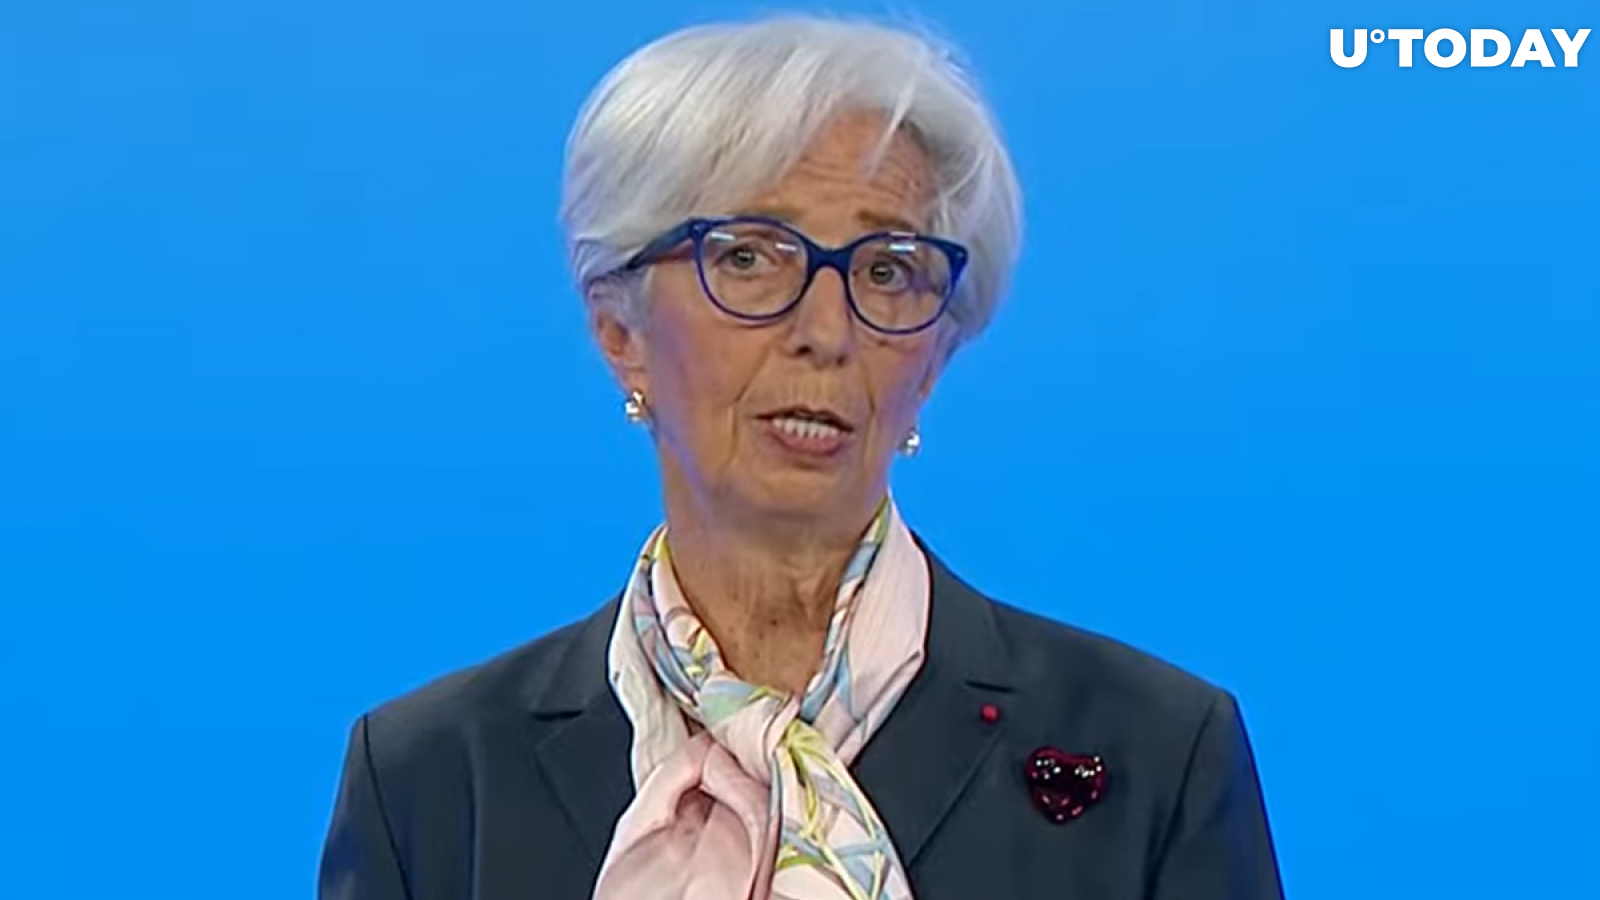 ECB Chief Lagarde Calls Crypto "Suspicious and Speculative" Assets, Not Currencies